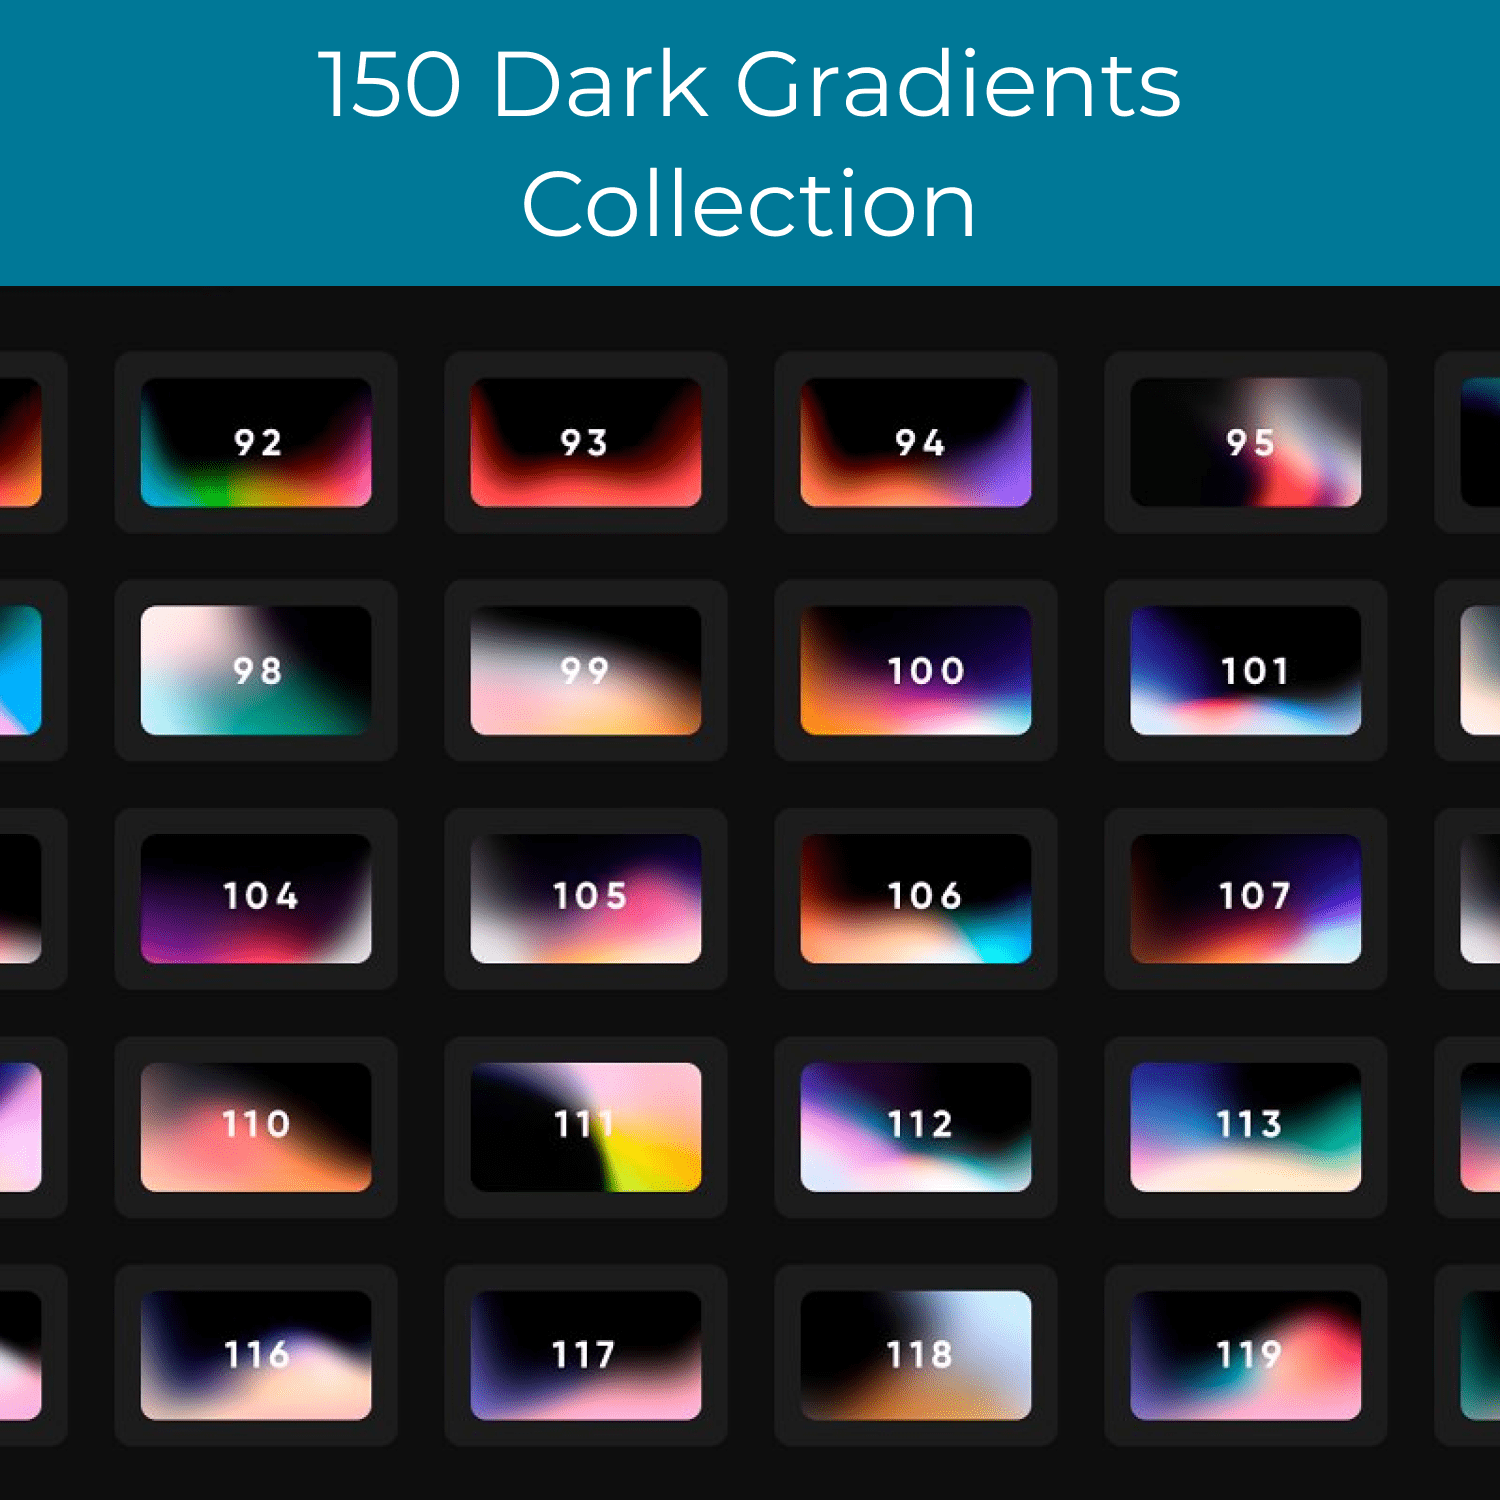 150 Dark Gradients Collection cover.